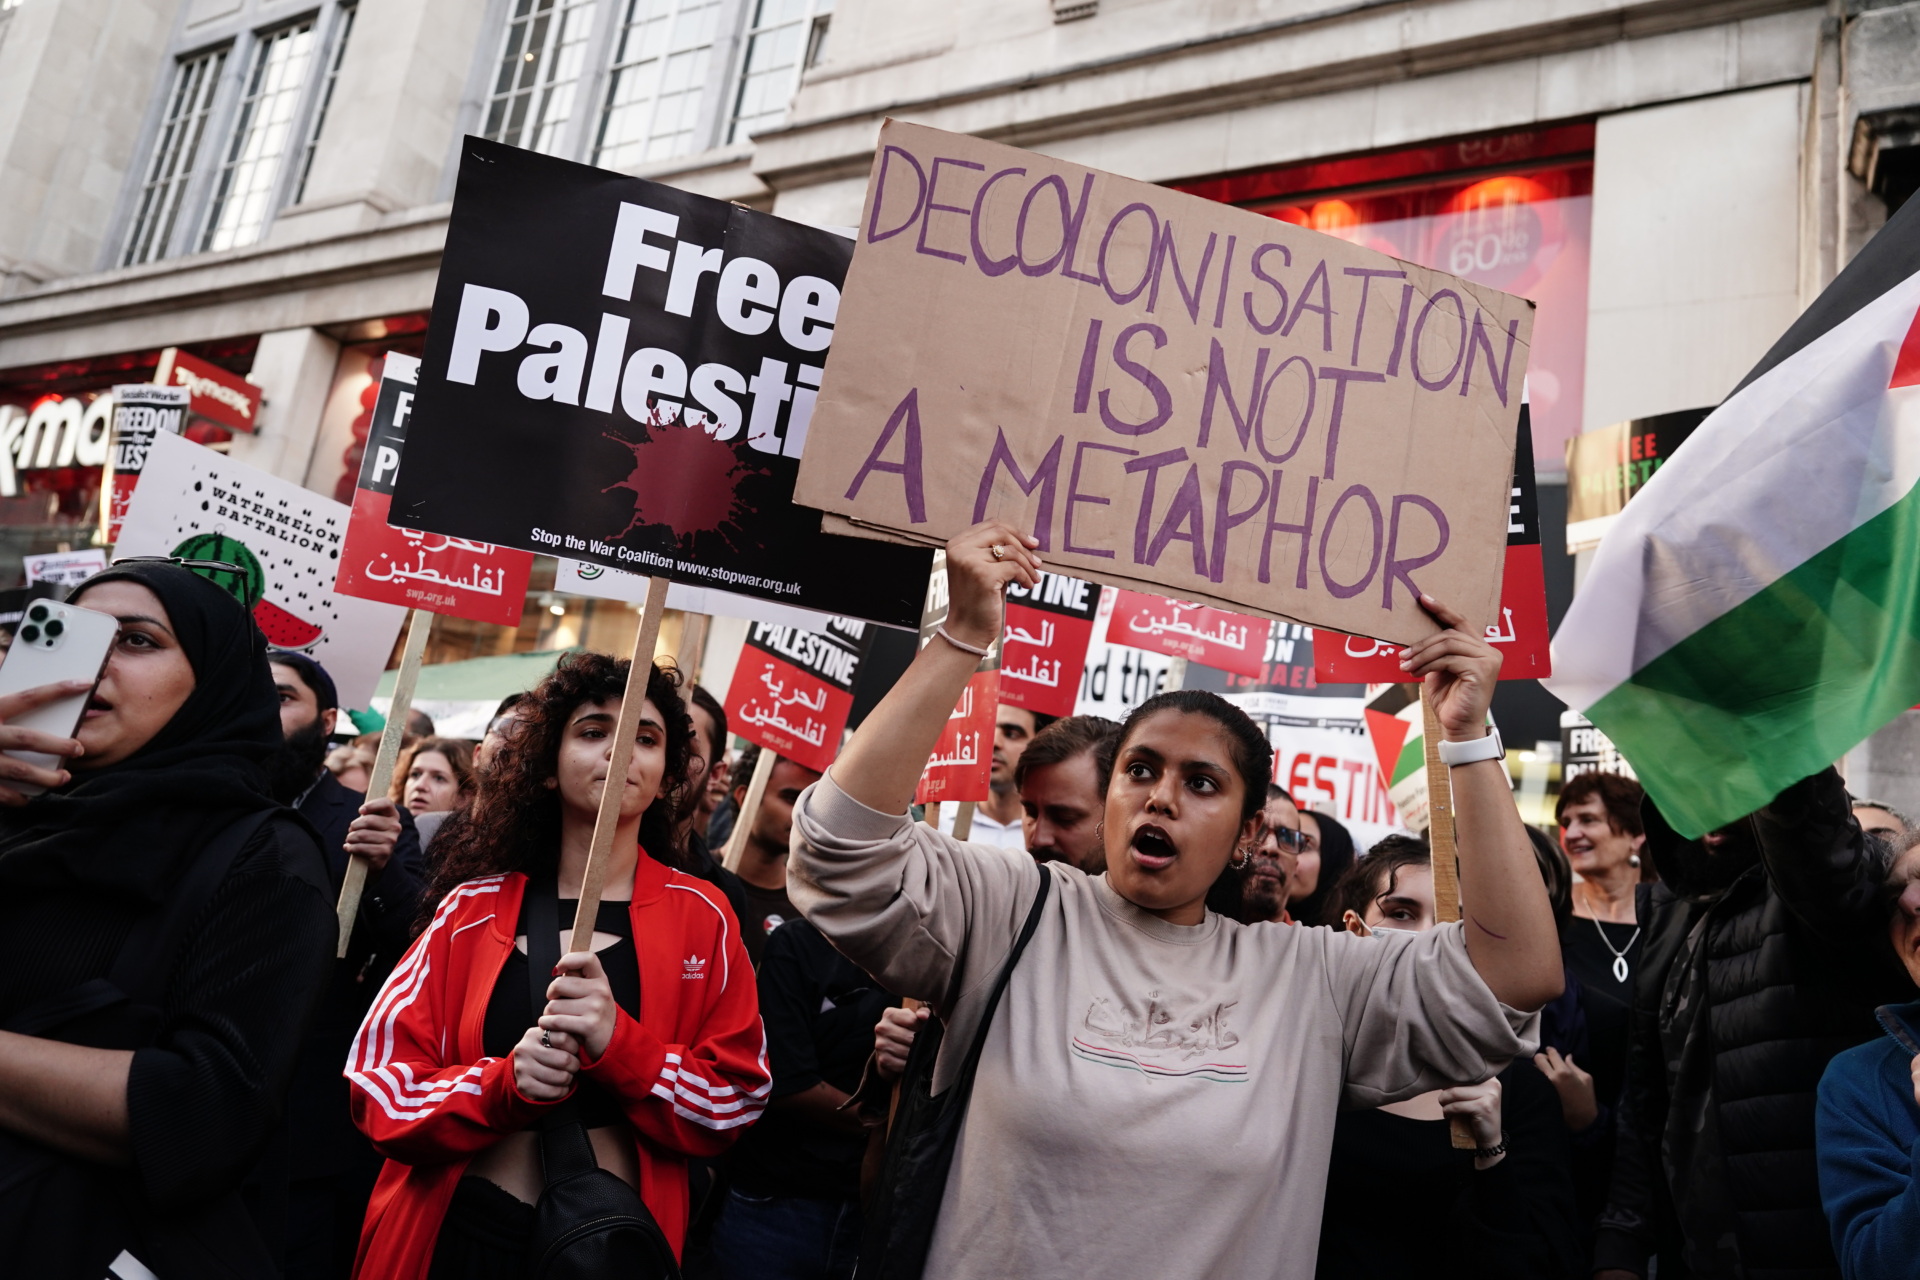 People take part in a Palestine solidarity campaign demonstration near the Israeli embassy in Kensington, London, as the death toll rises amid ongoing violence in Israel and Gaza following a Hamas attack.  Photo date: Monday, October 9, 2023. (Photo by: Jordan Pettit/PA Images via Getty Images)